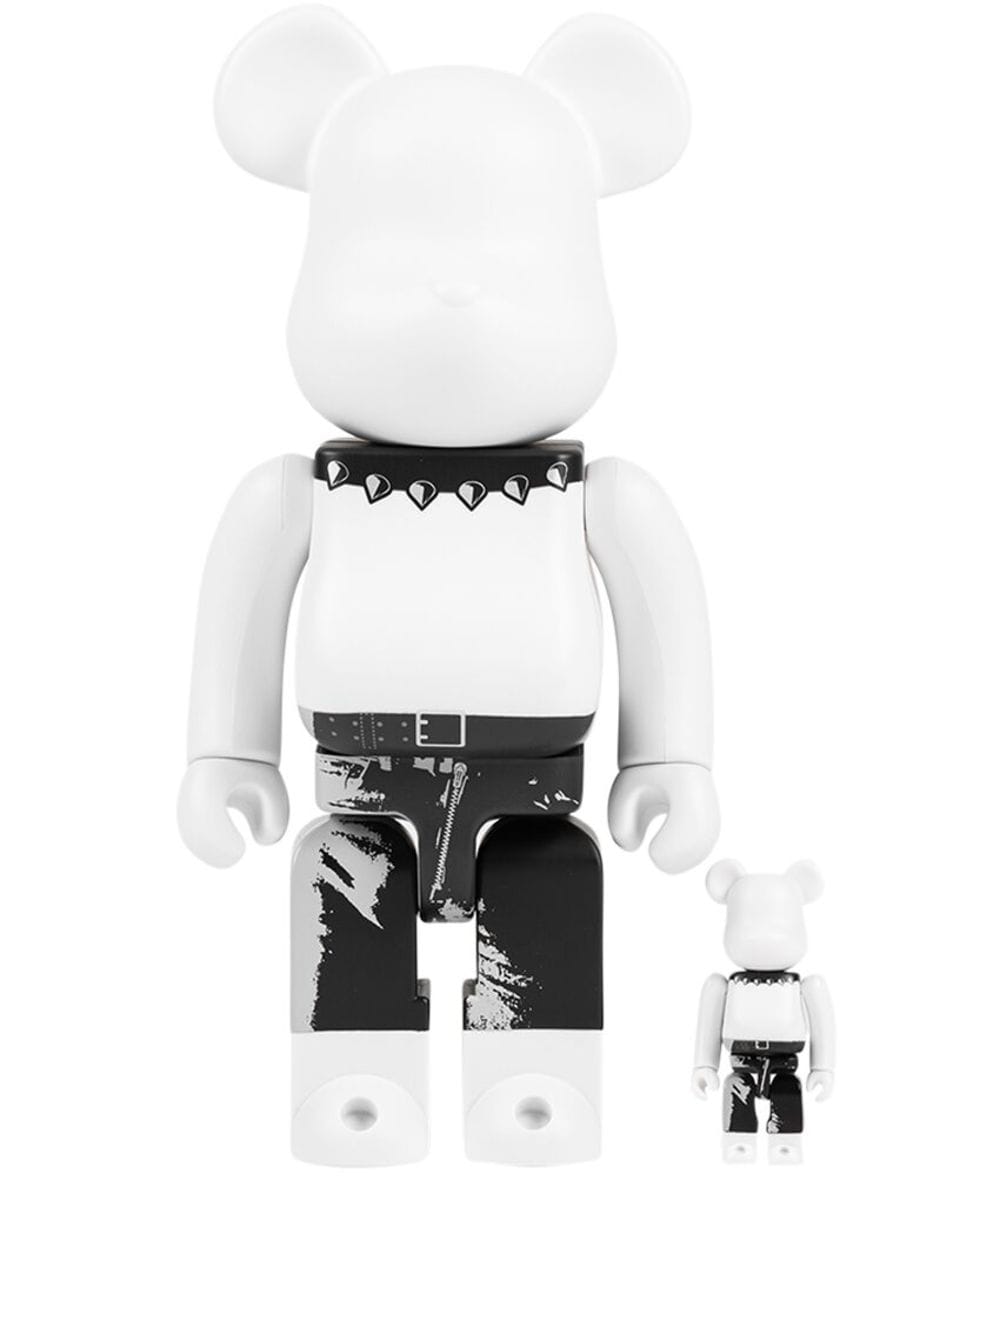 MEDICOM TOY x Andy Warhol The Rolling Stones (Sticky Fingers) BE@RBRICK 100% and 400% figure set - Black von MEDICOM TOY